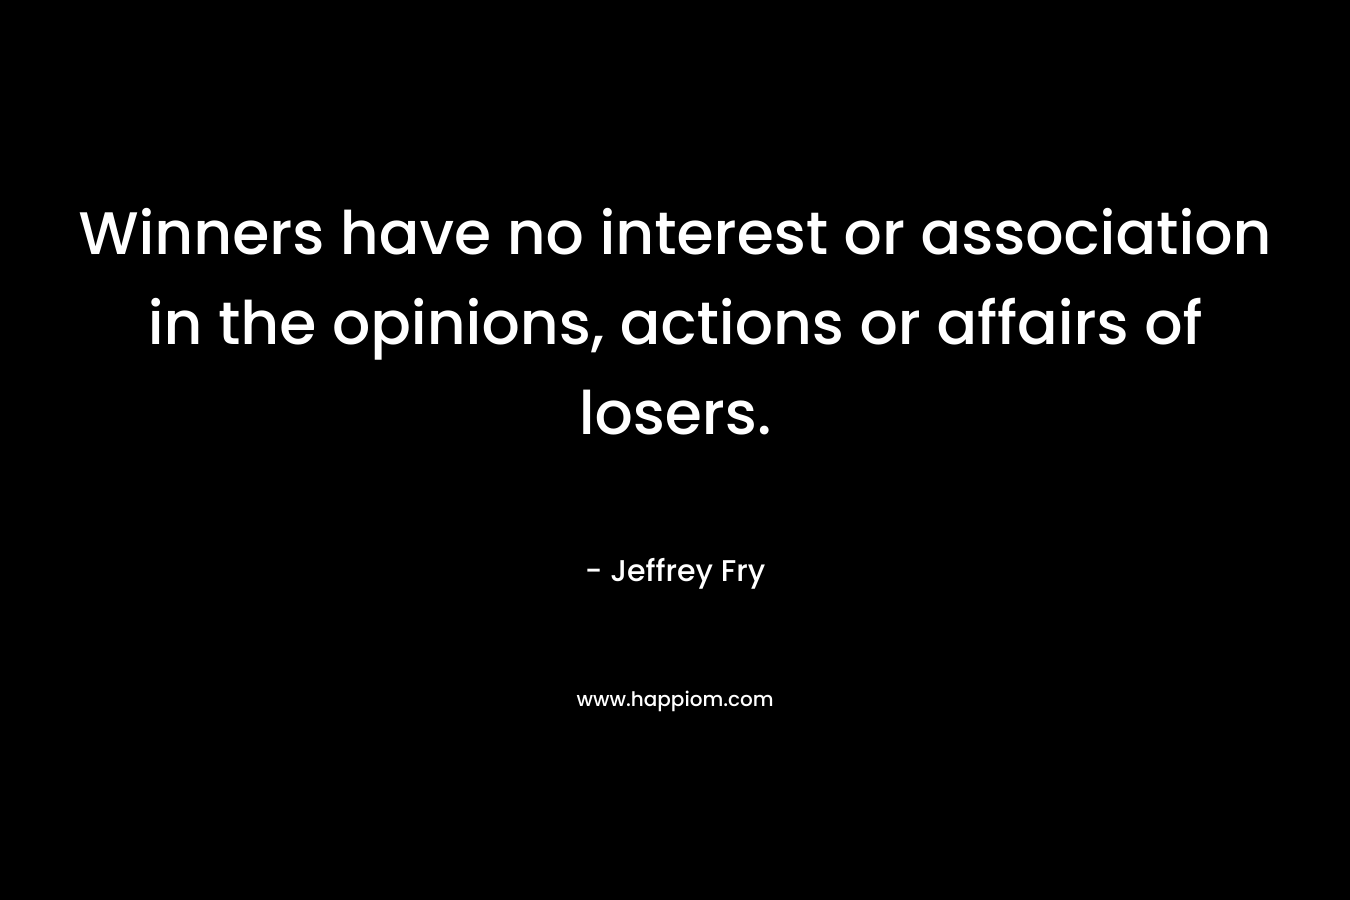 Winners have no interest or association in the opinions, actions or affairs of losers. – Jeffrey Fry